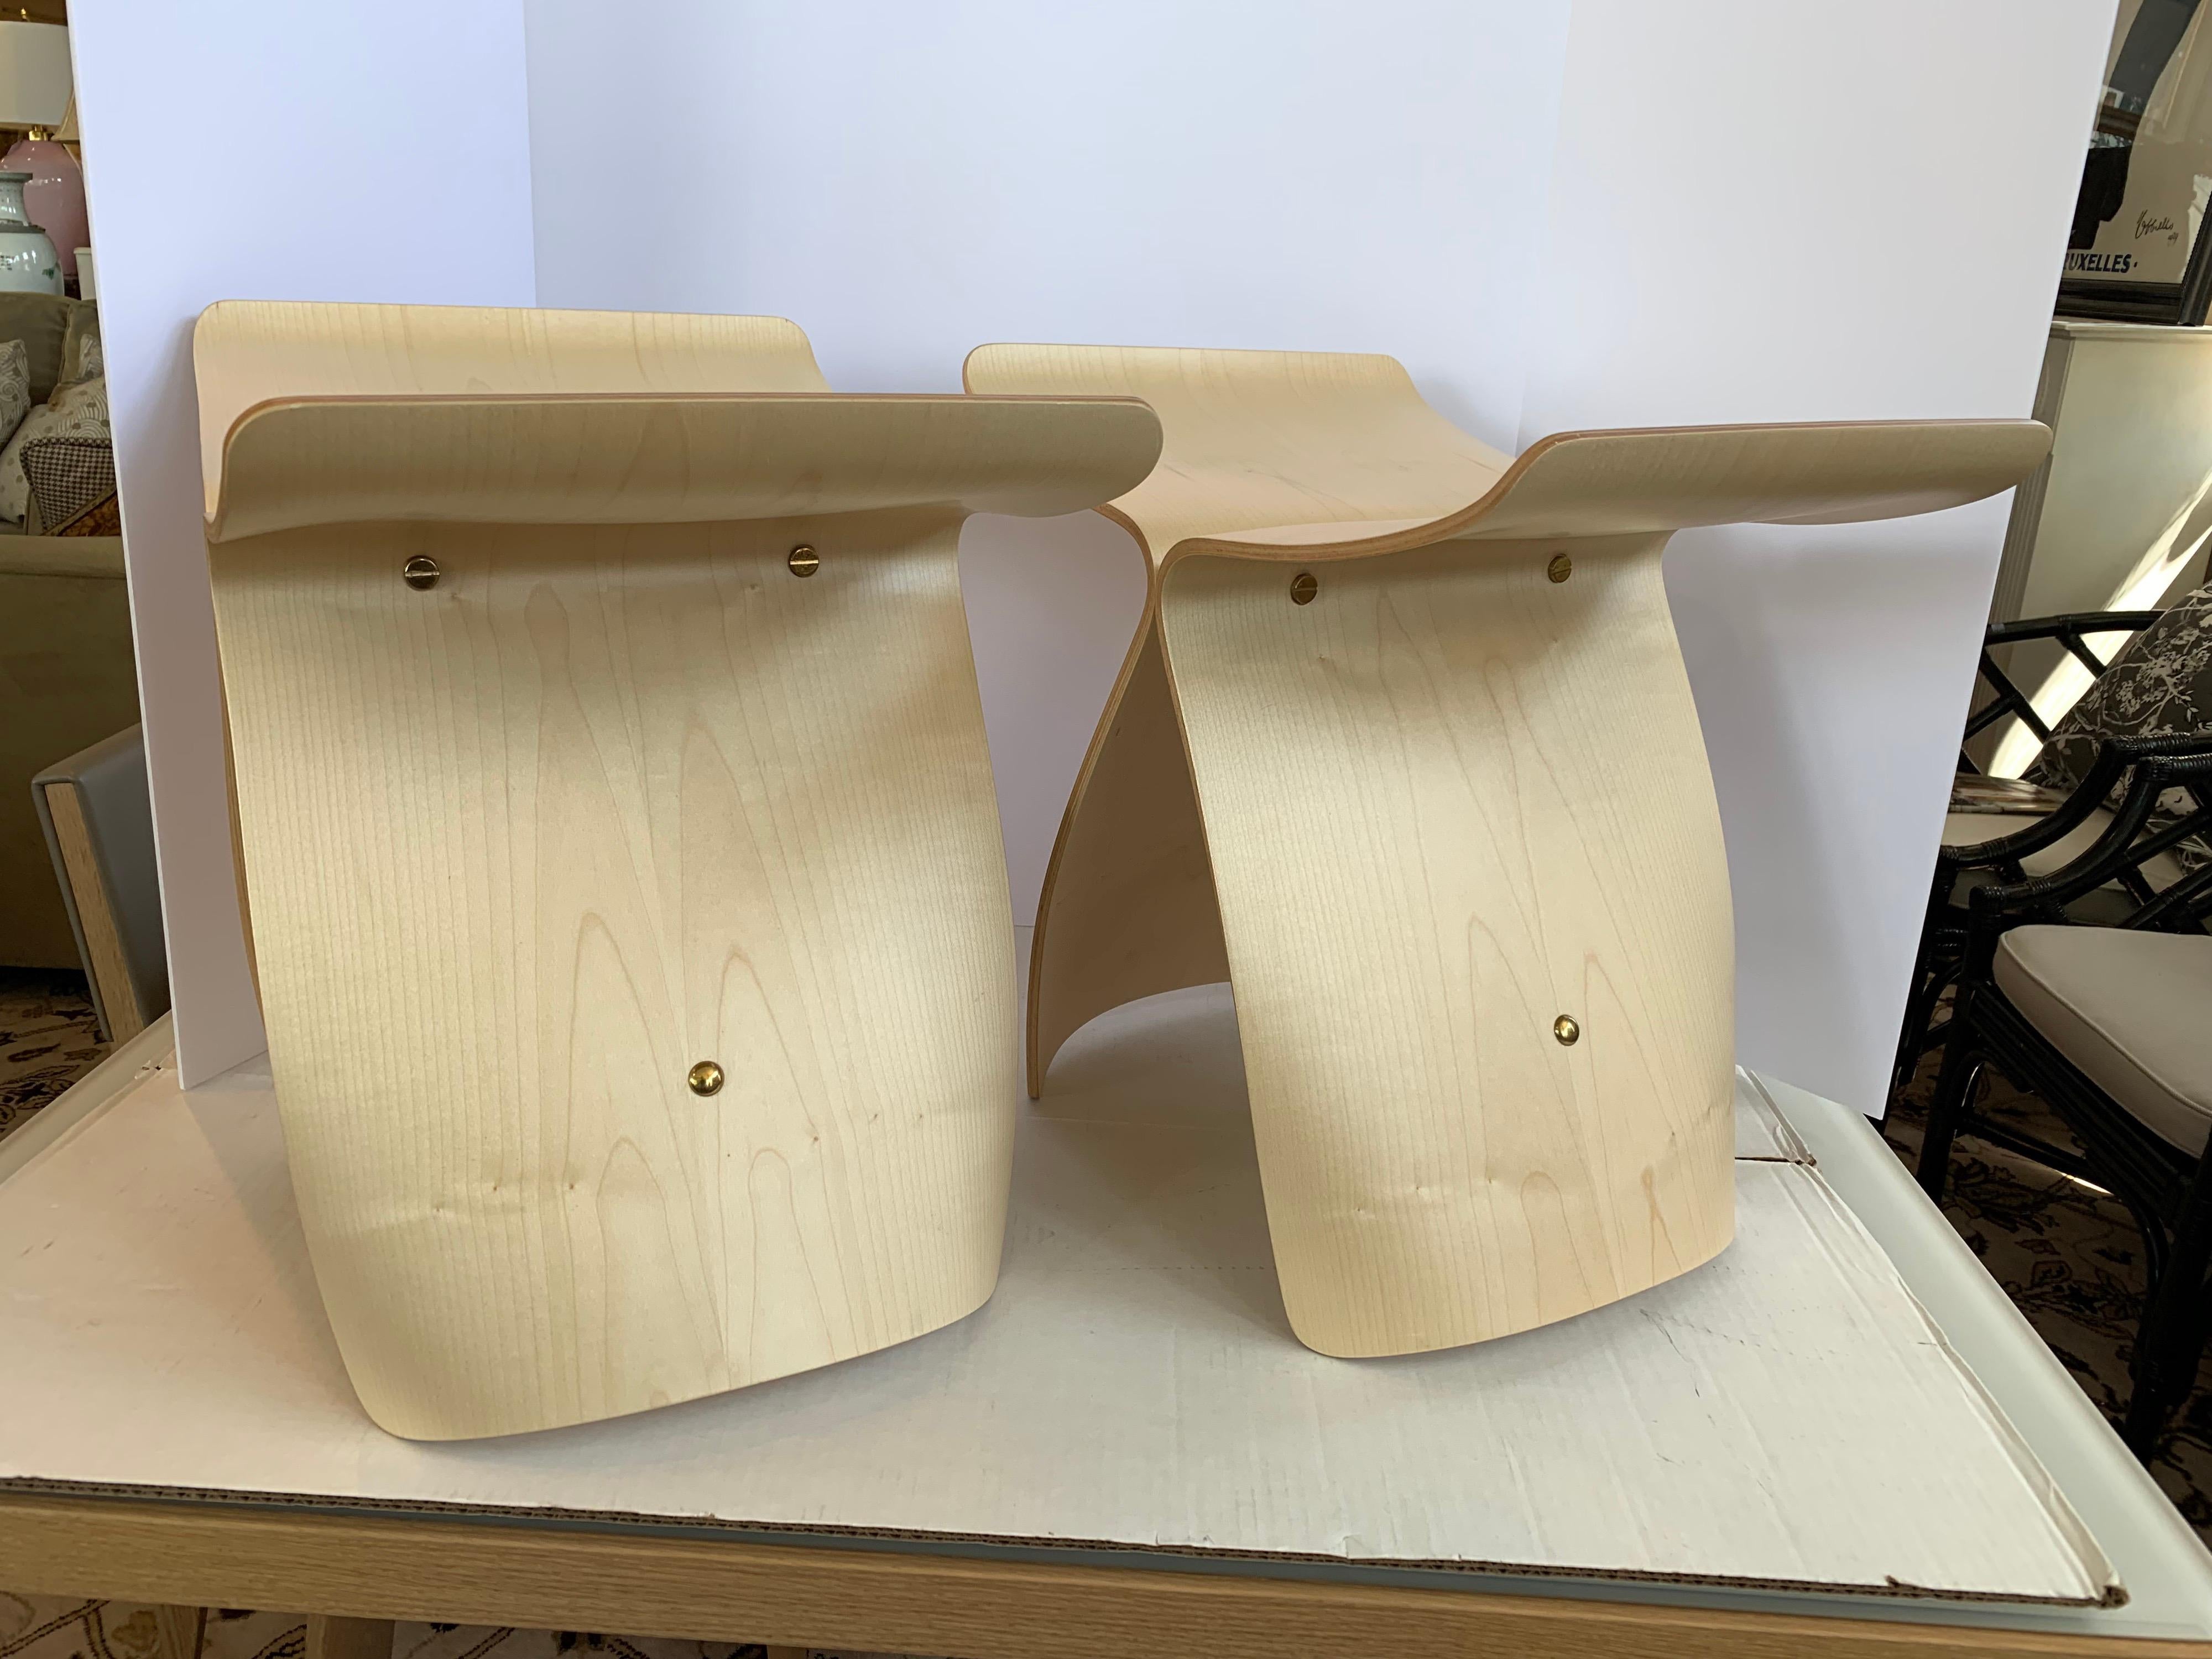 These matching butterfly stools uniquely combine Eastern forms with the plywood molding technique developed by Charles and Ray Eames. The gently curving silhouette reminiscent of a butterfly‘s wings and is made of molded plywood with a lacquer